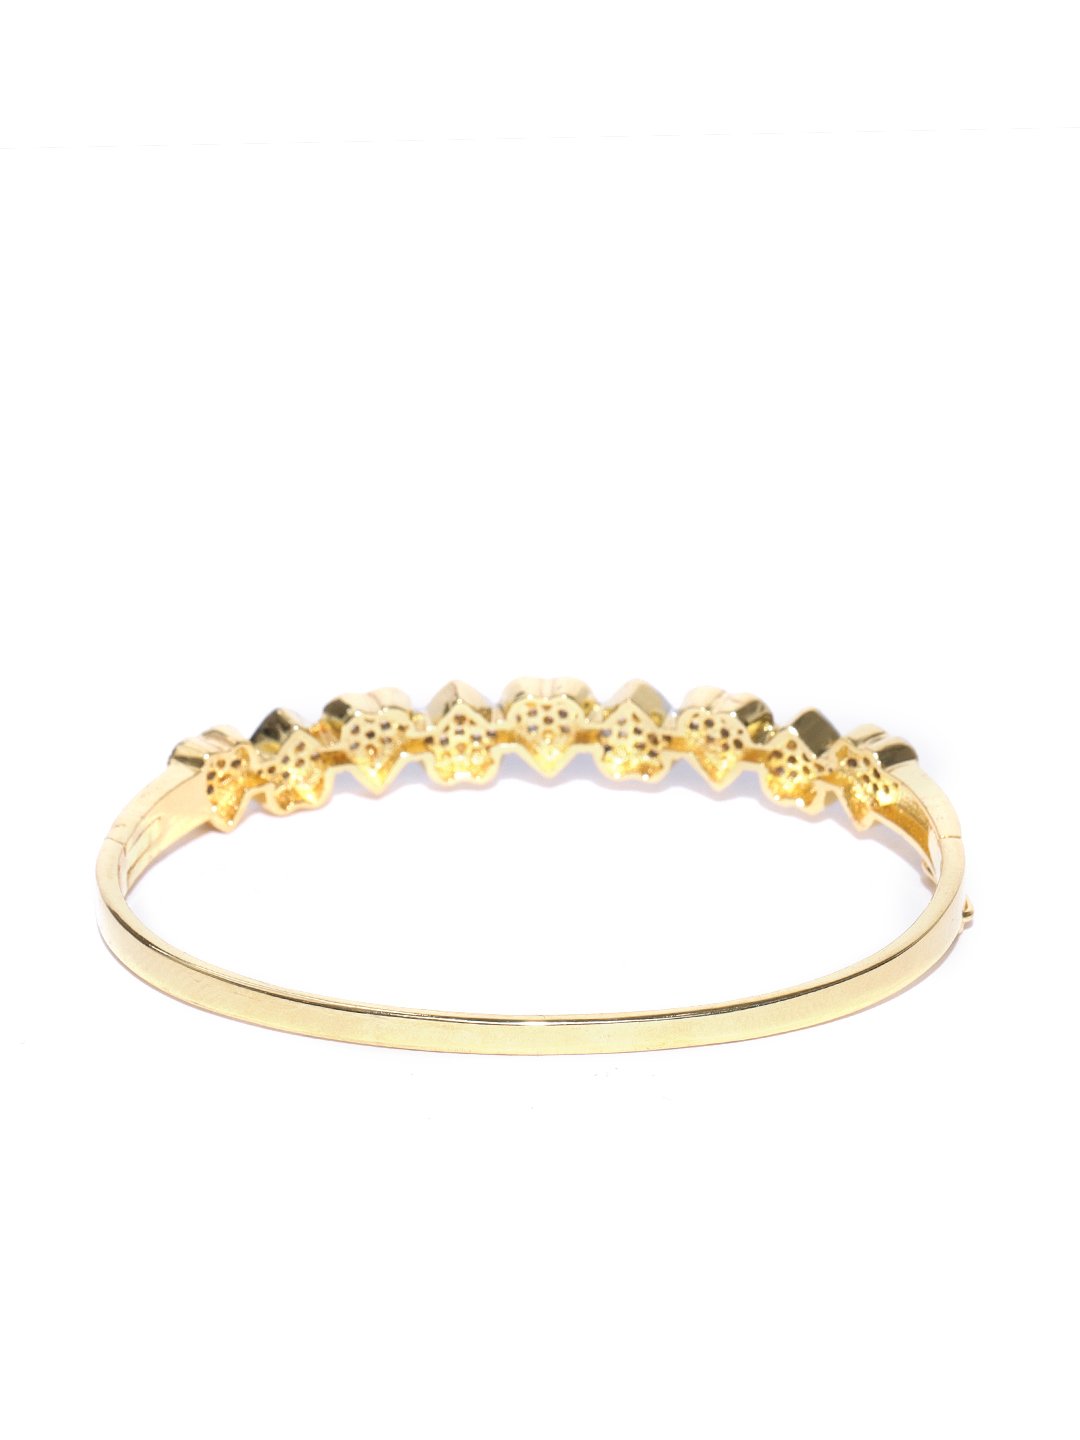 Women's Gold-Plated American Diamond Studded Bracelet With Finger Ring in Heart Pattern - Priyaasi